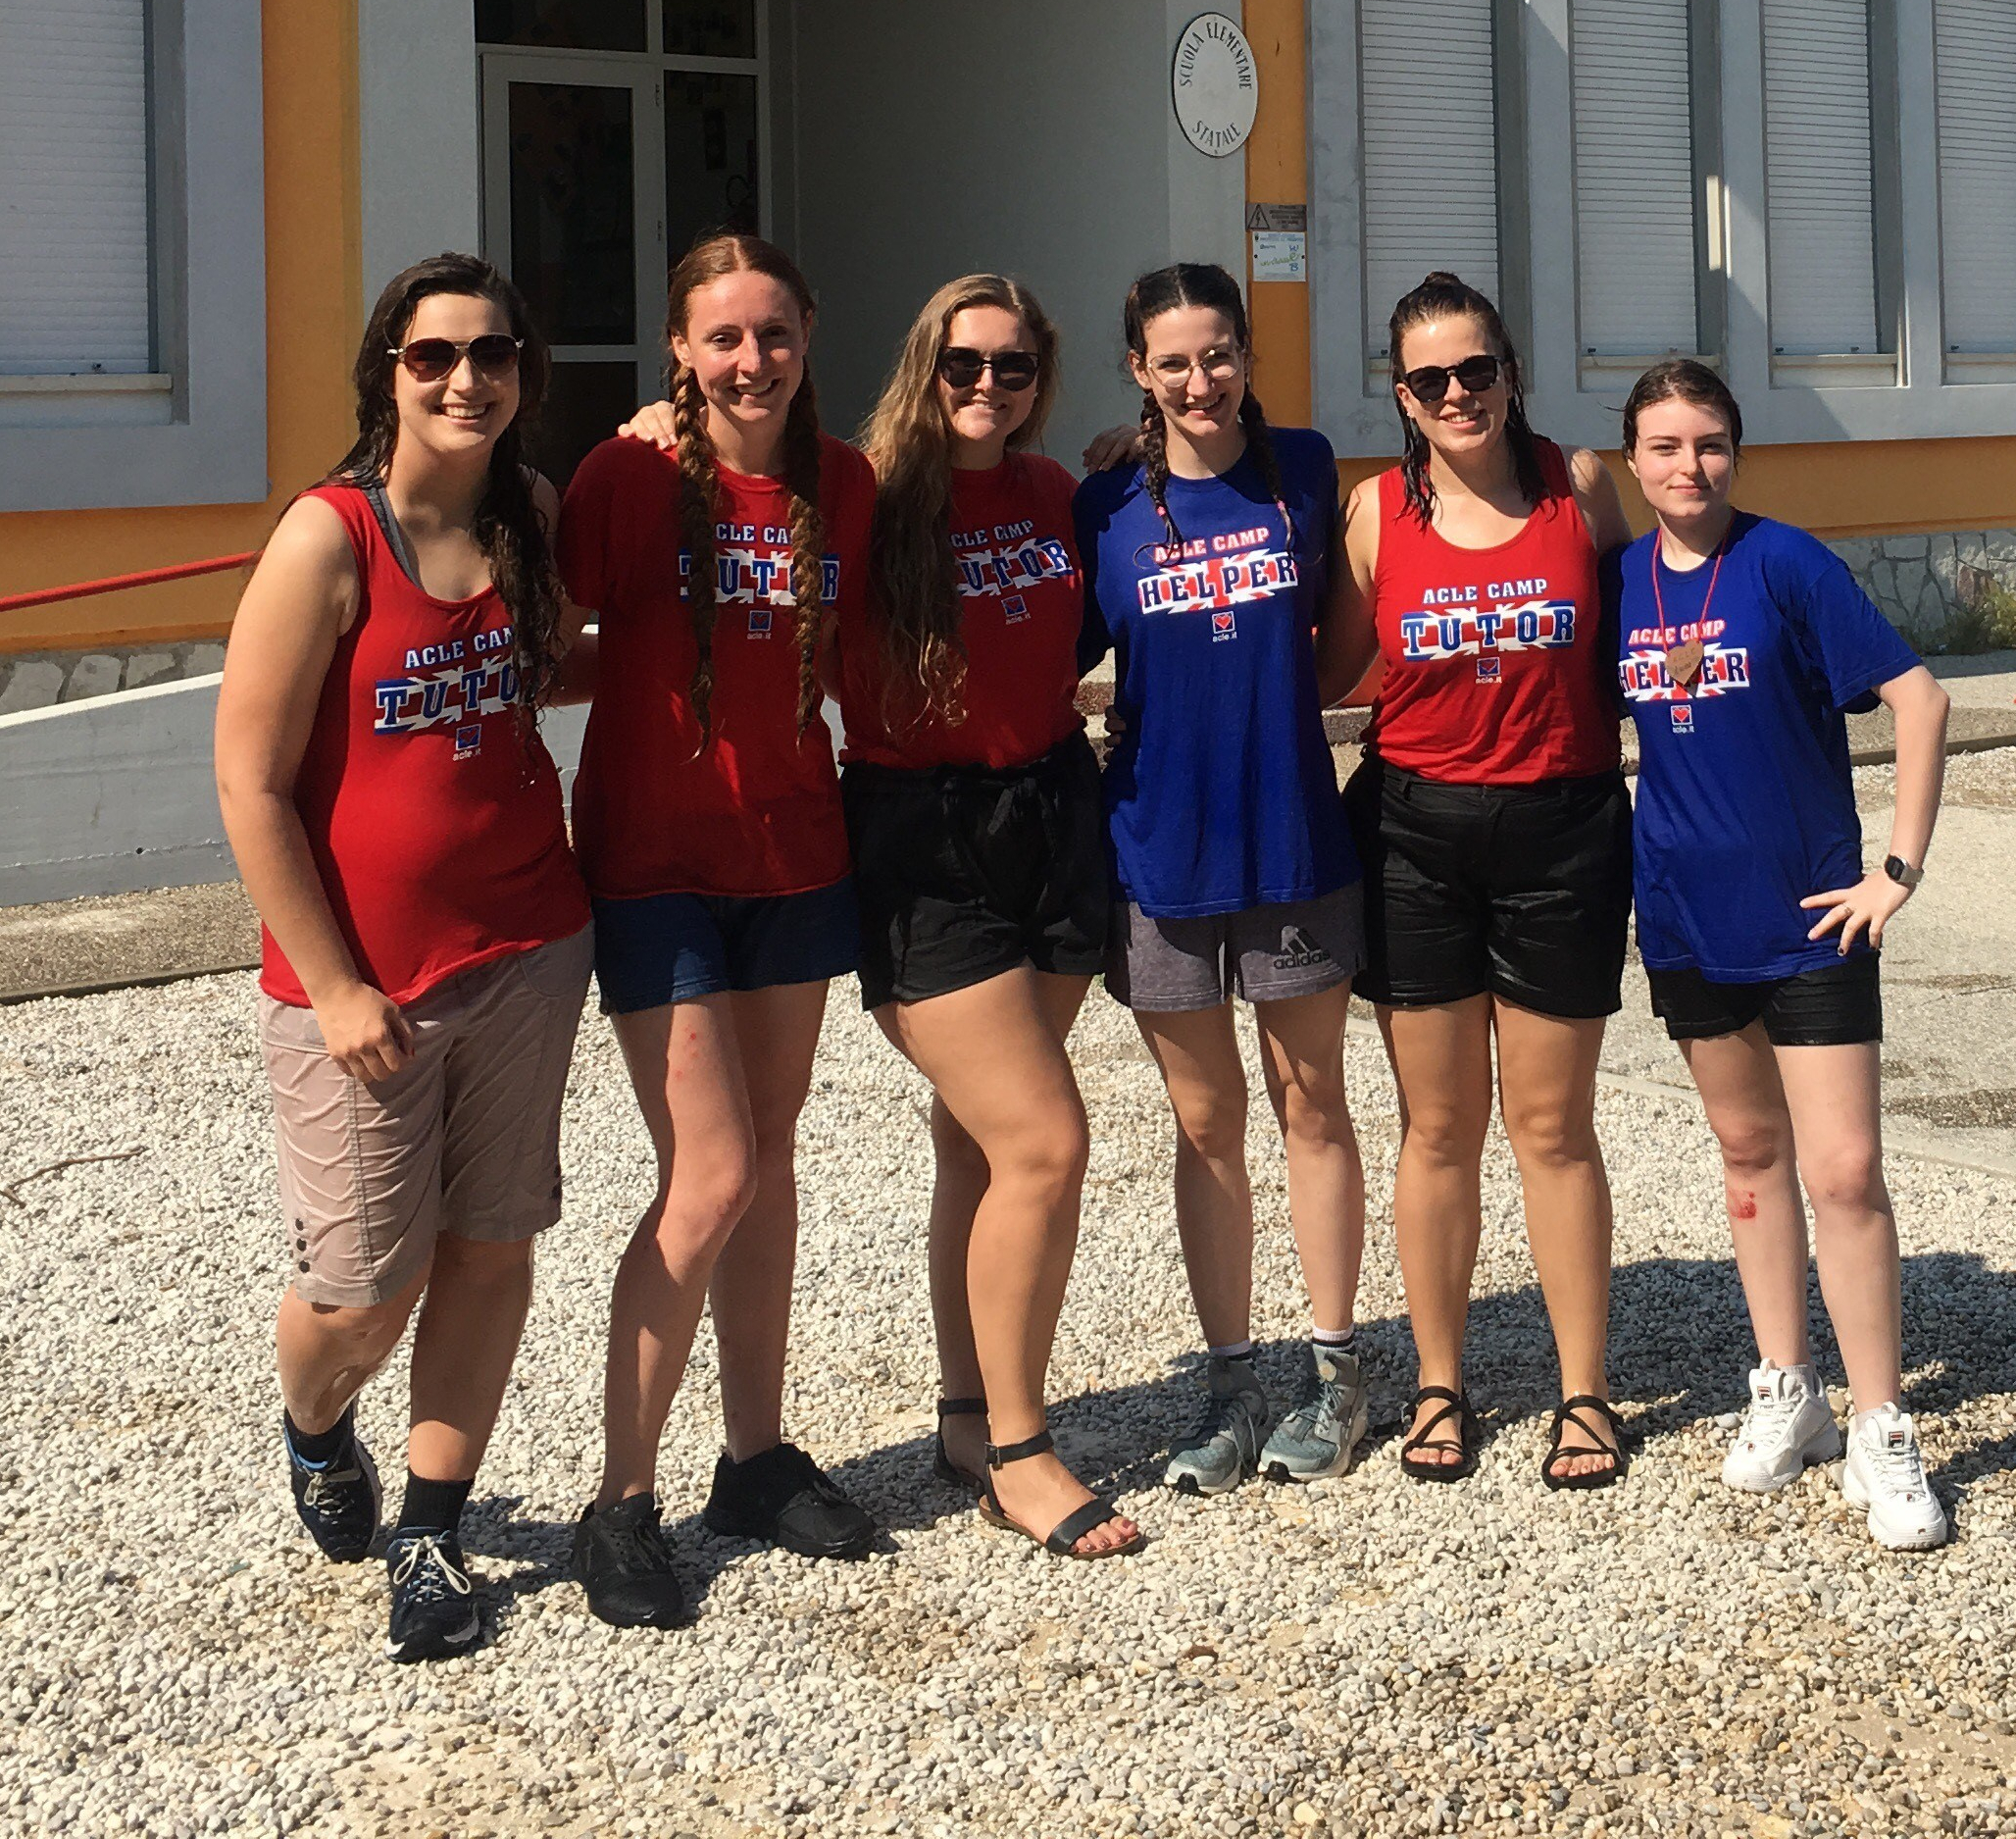 Six young women pose outside in a row, smiling and wearing red or blue shirts that read "ACLE CAMP TUTOR."